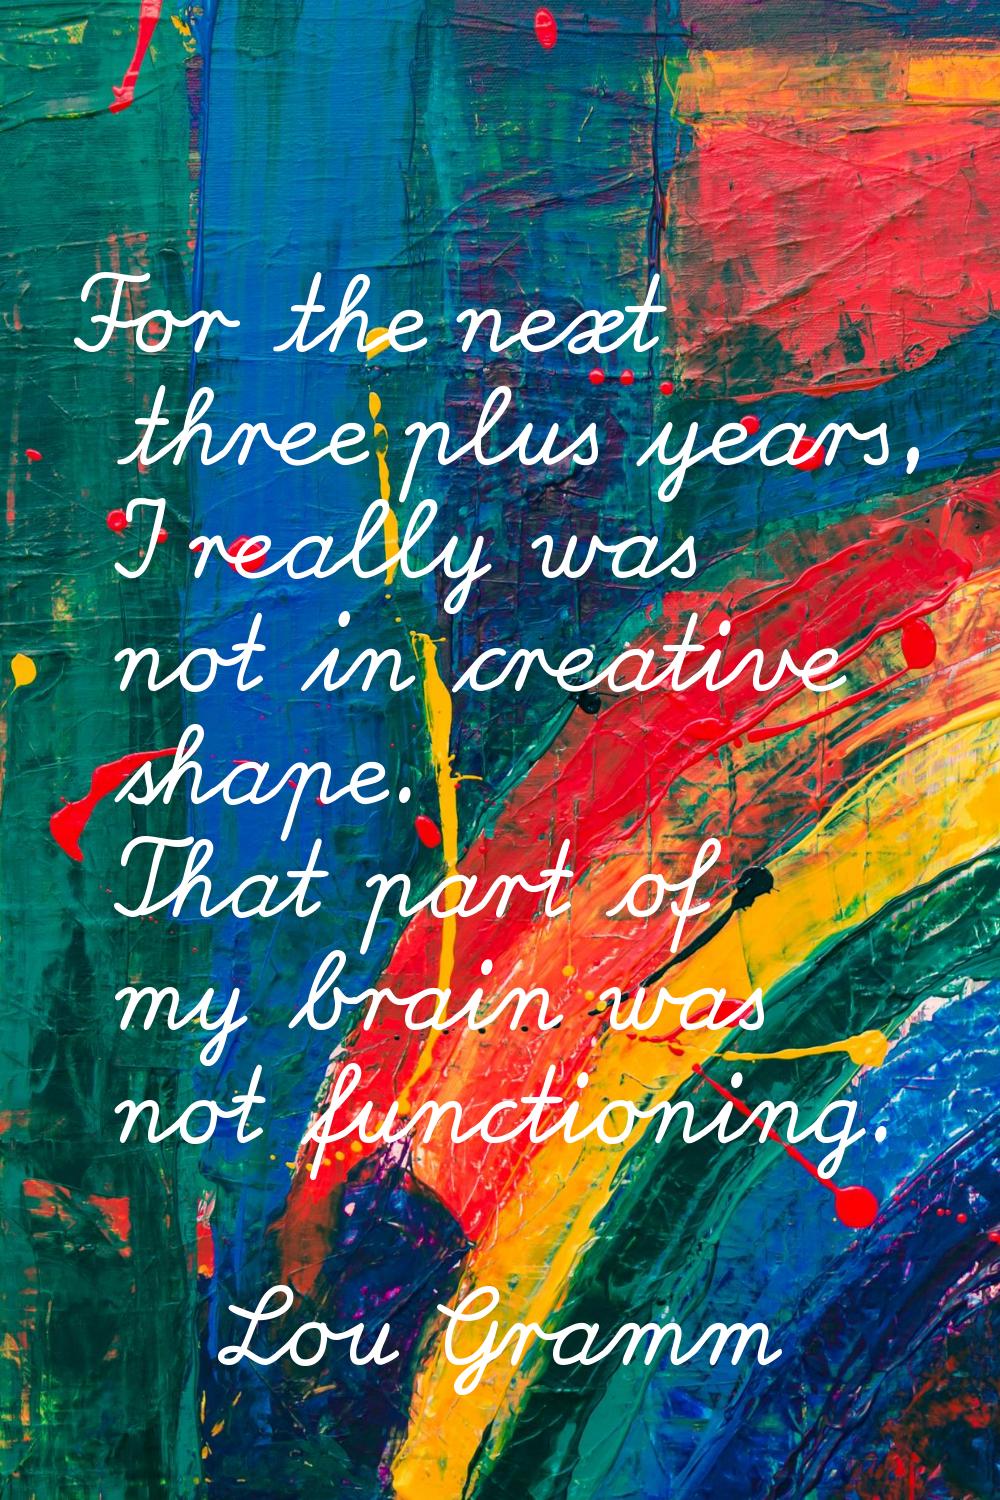 For the next three plus years, I really was not in creative shape. That part of my brain was not fu